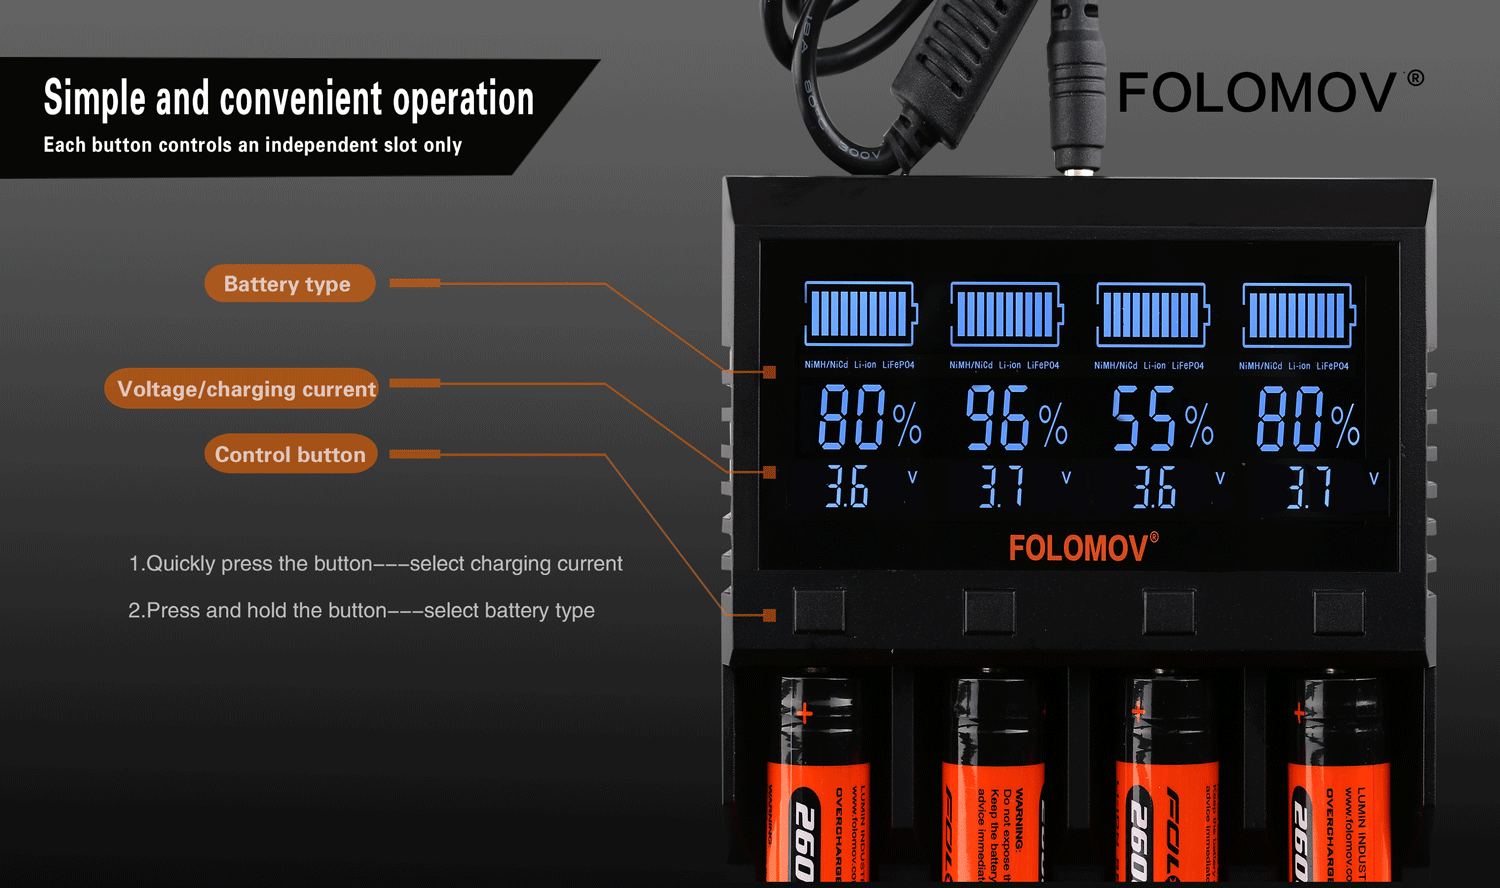 Folomov A4 Smart Quick Charger with LCD Screen Simple and convenient operation FOLOMOV Each button controls an independent slot only Battery type     m  NiMH NiCd Li ion LiFeP04 NiMH NiCd Li ion LiFeP04 NiMH NiCd Li ion LiFeP04 NiMH NiCd Li ion LiFeP04 Voltage charging current  95 55 8  Control button FOLOMOV 1 Quickly press the button    select charging current 2  Press and hold the button   select battery type